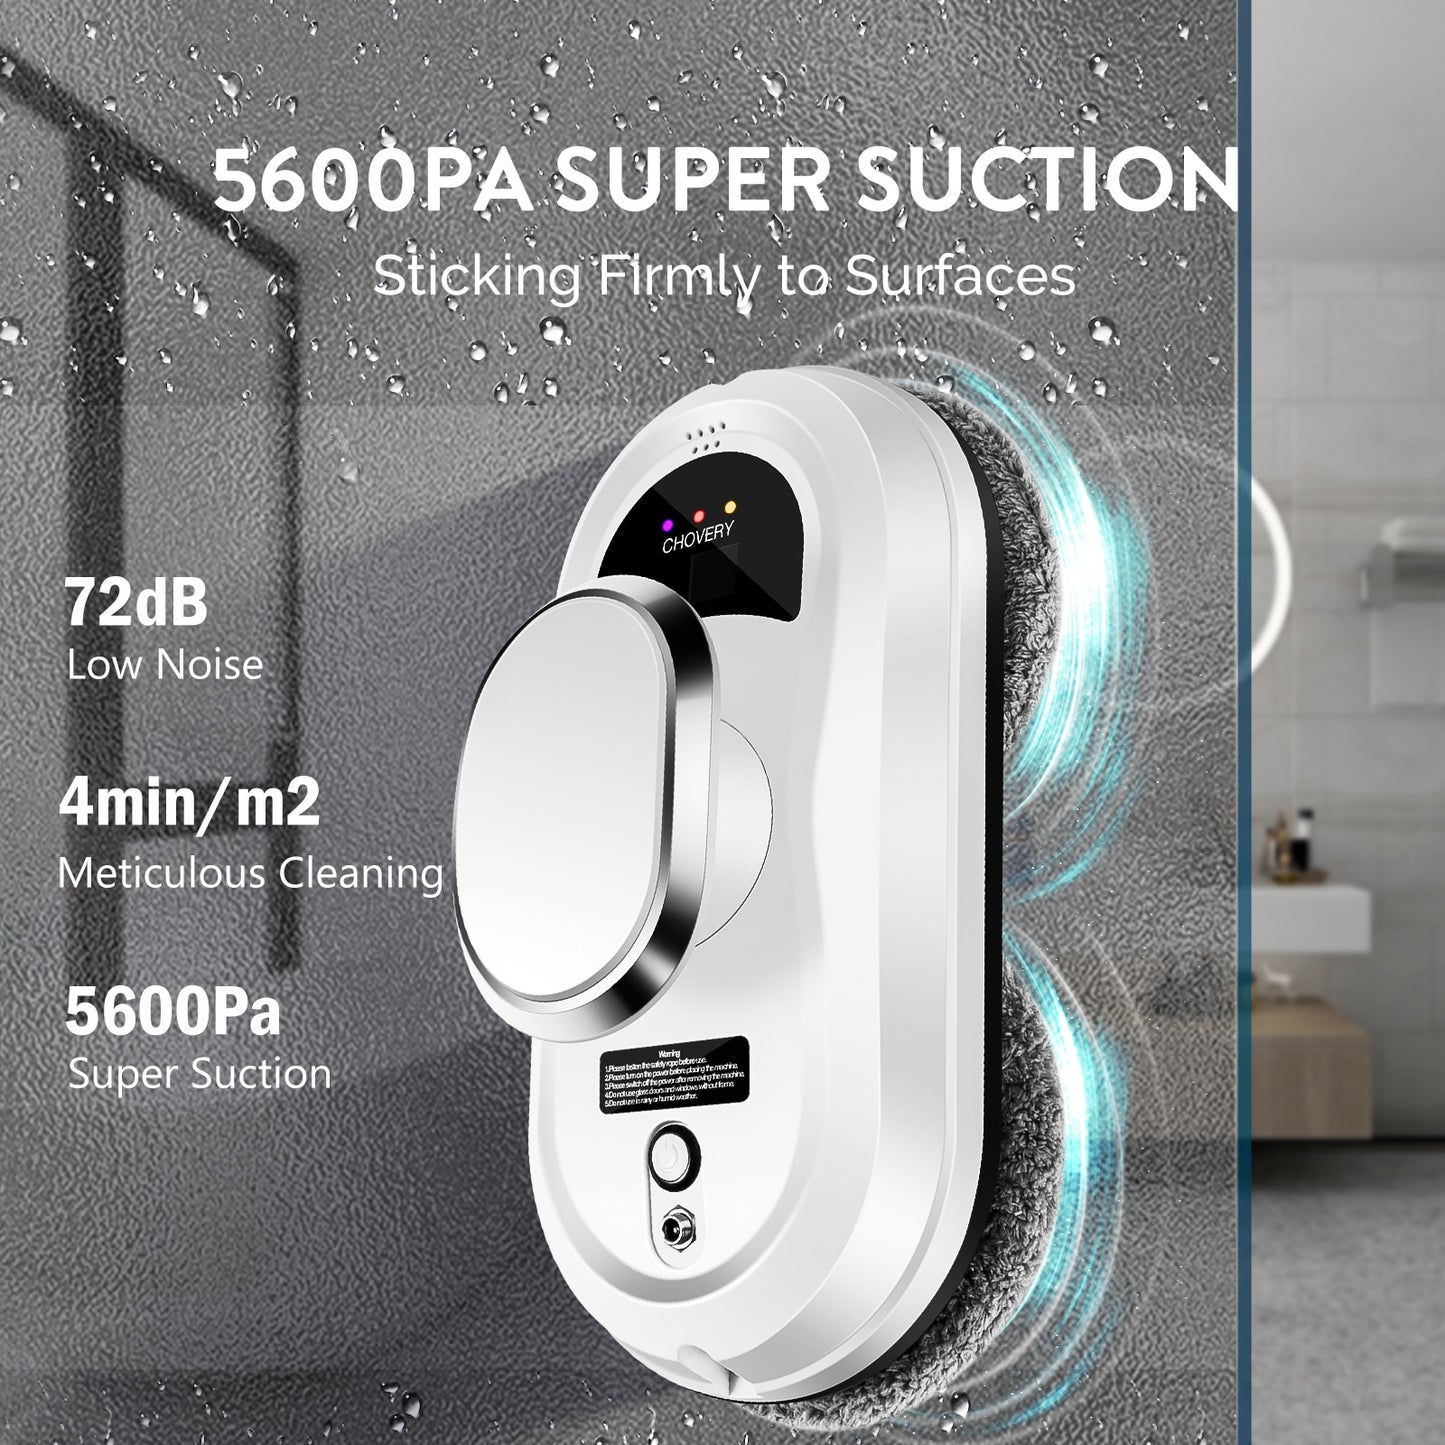 Robot vacuum cleaner window cleaning robot window cleaner electric glass limpiacristales remote control for home appliance